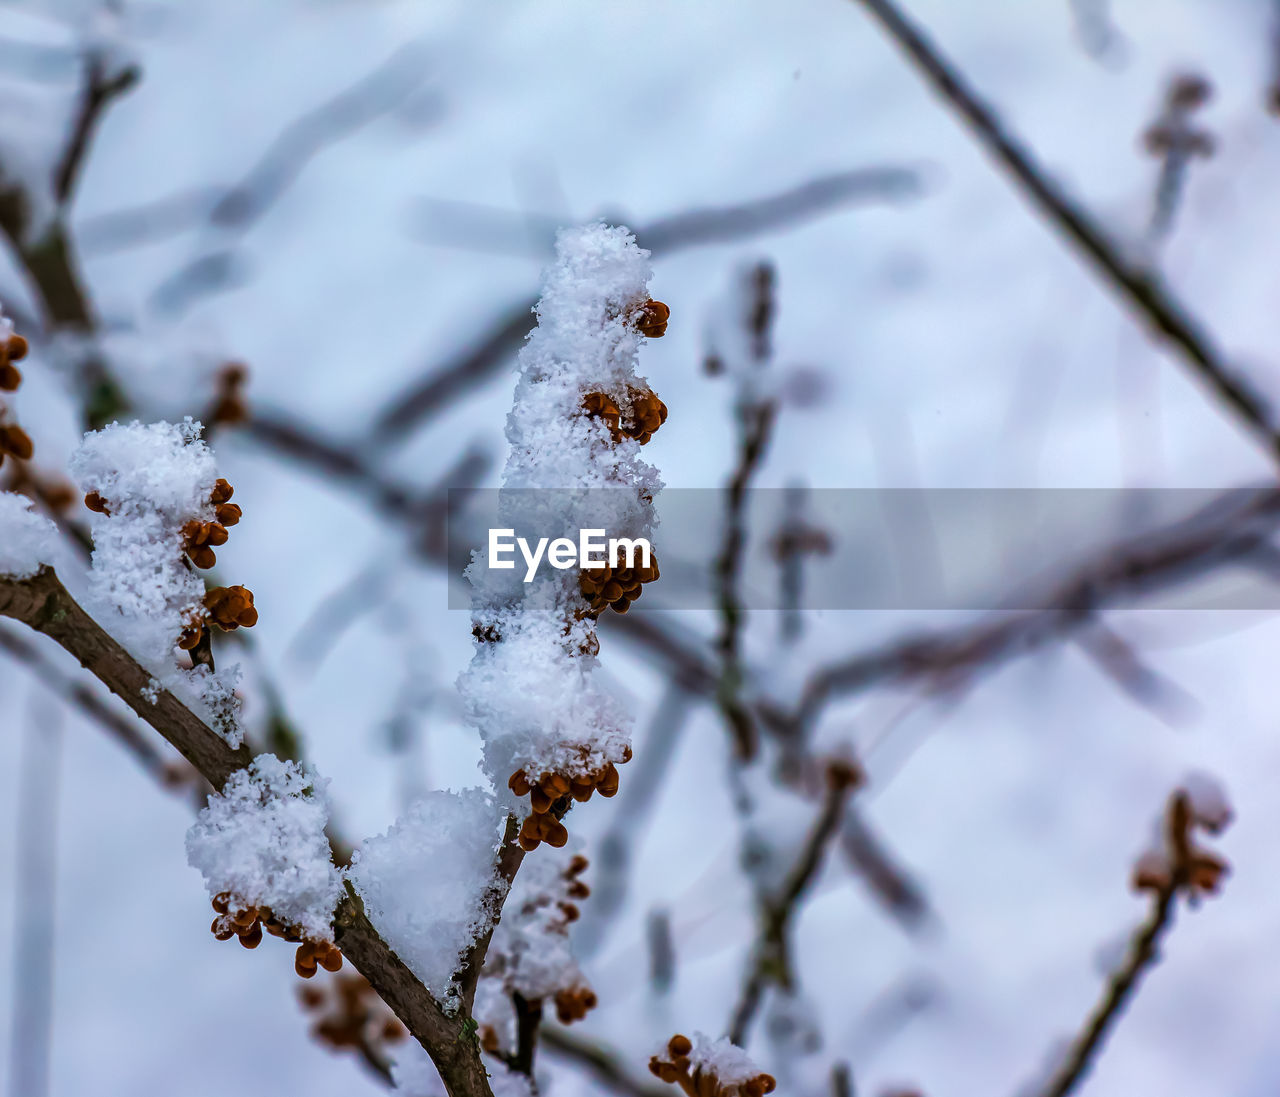 winter, snow, cold temperature, plant, branch, tree, nature, freezing, twig, frost, frozen, beauty in nature, no people, ice, close-up, focus on foreground, leaf, flower, day, white, outdoors, macro photography, spring, environment, selective focus, tranquility, growth, coniferous tree, fruit